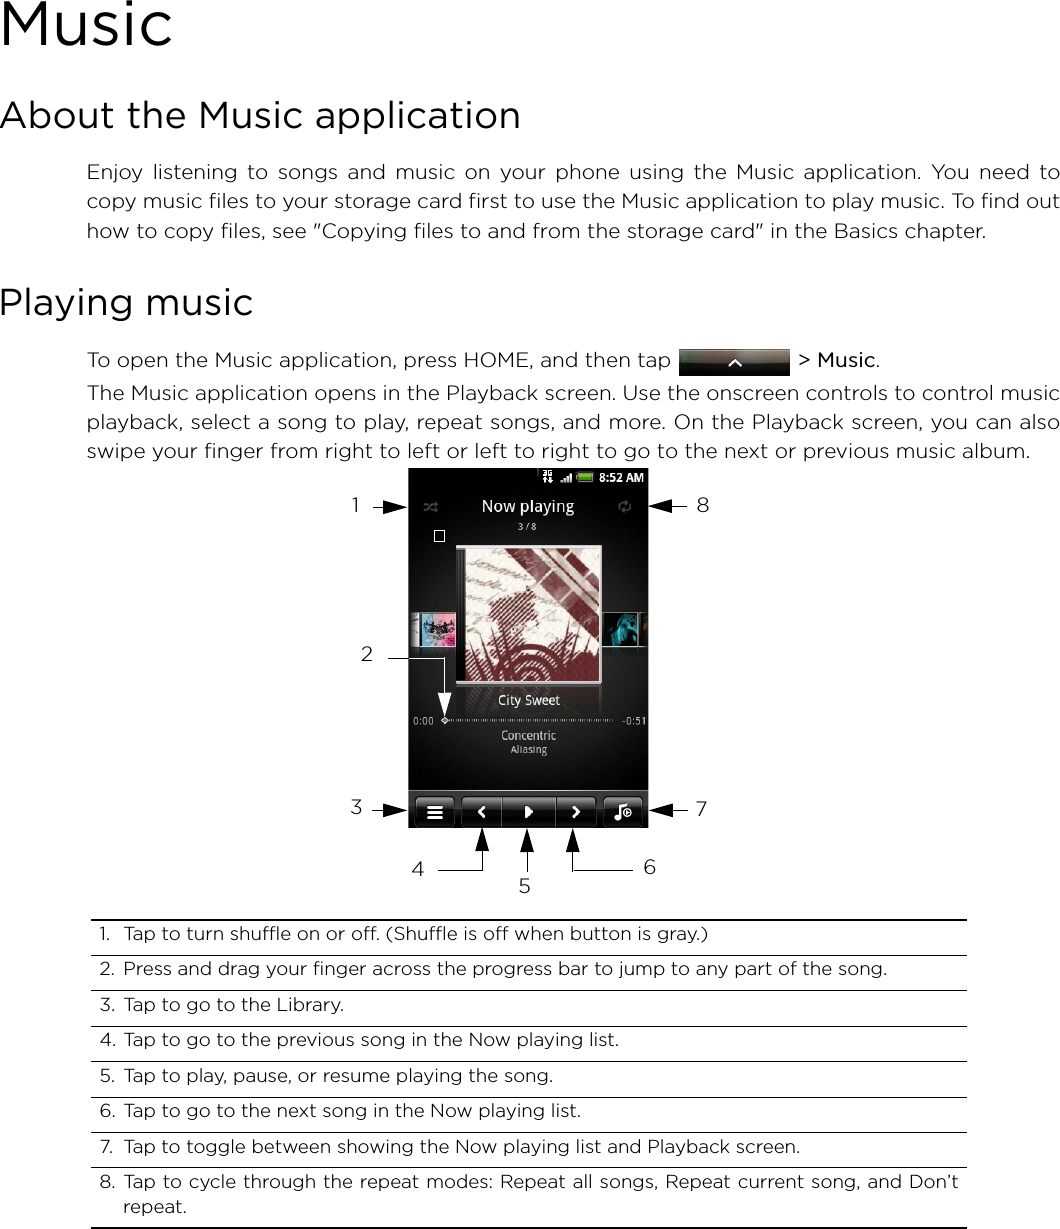 MusicAbout the Music applicationEnjoy listening to songs and music on your phone using the Music application. You need tocopy music files to your storage card first to use the Music application to play music. To find outhow to copy files, see &quot;Copying files to and from the storage card&quot; in the Basics chapter.Playing musicTo open the Music application, press HOME, and then tap   &gt; Music.The Music application opens in the Playback screen. Use the onscreen controls to control musicplayback, select a song to play, repeat songs, and more. On the Playback screen, you can alsoswipe your finger from right to left or left to right to go to the next or previous music album.1. Tap to turn shuffle on or off. (Shuffle is off when button is gray.)2. Press and drag your finger across the progress bar to jump to any part of the song.3. Tap to go to the Library.4. Tap to go to the previous song in the Now playing list.5. Tap to play, pause, or resume playing the song.6. Tap to go to the next song in the Now playing list.7. Tap to toggle between showing the Now playing list and Playback screen.8. Tap to cycle through the repeat modes: Repeat all songs, Repeat current song, and Don’trepeat.12346785